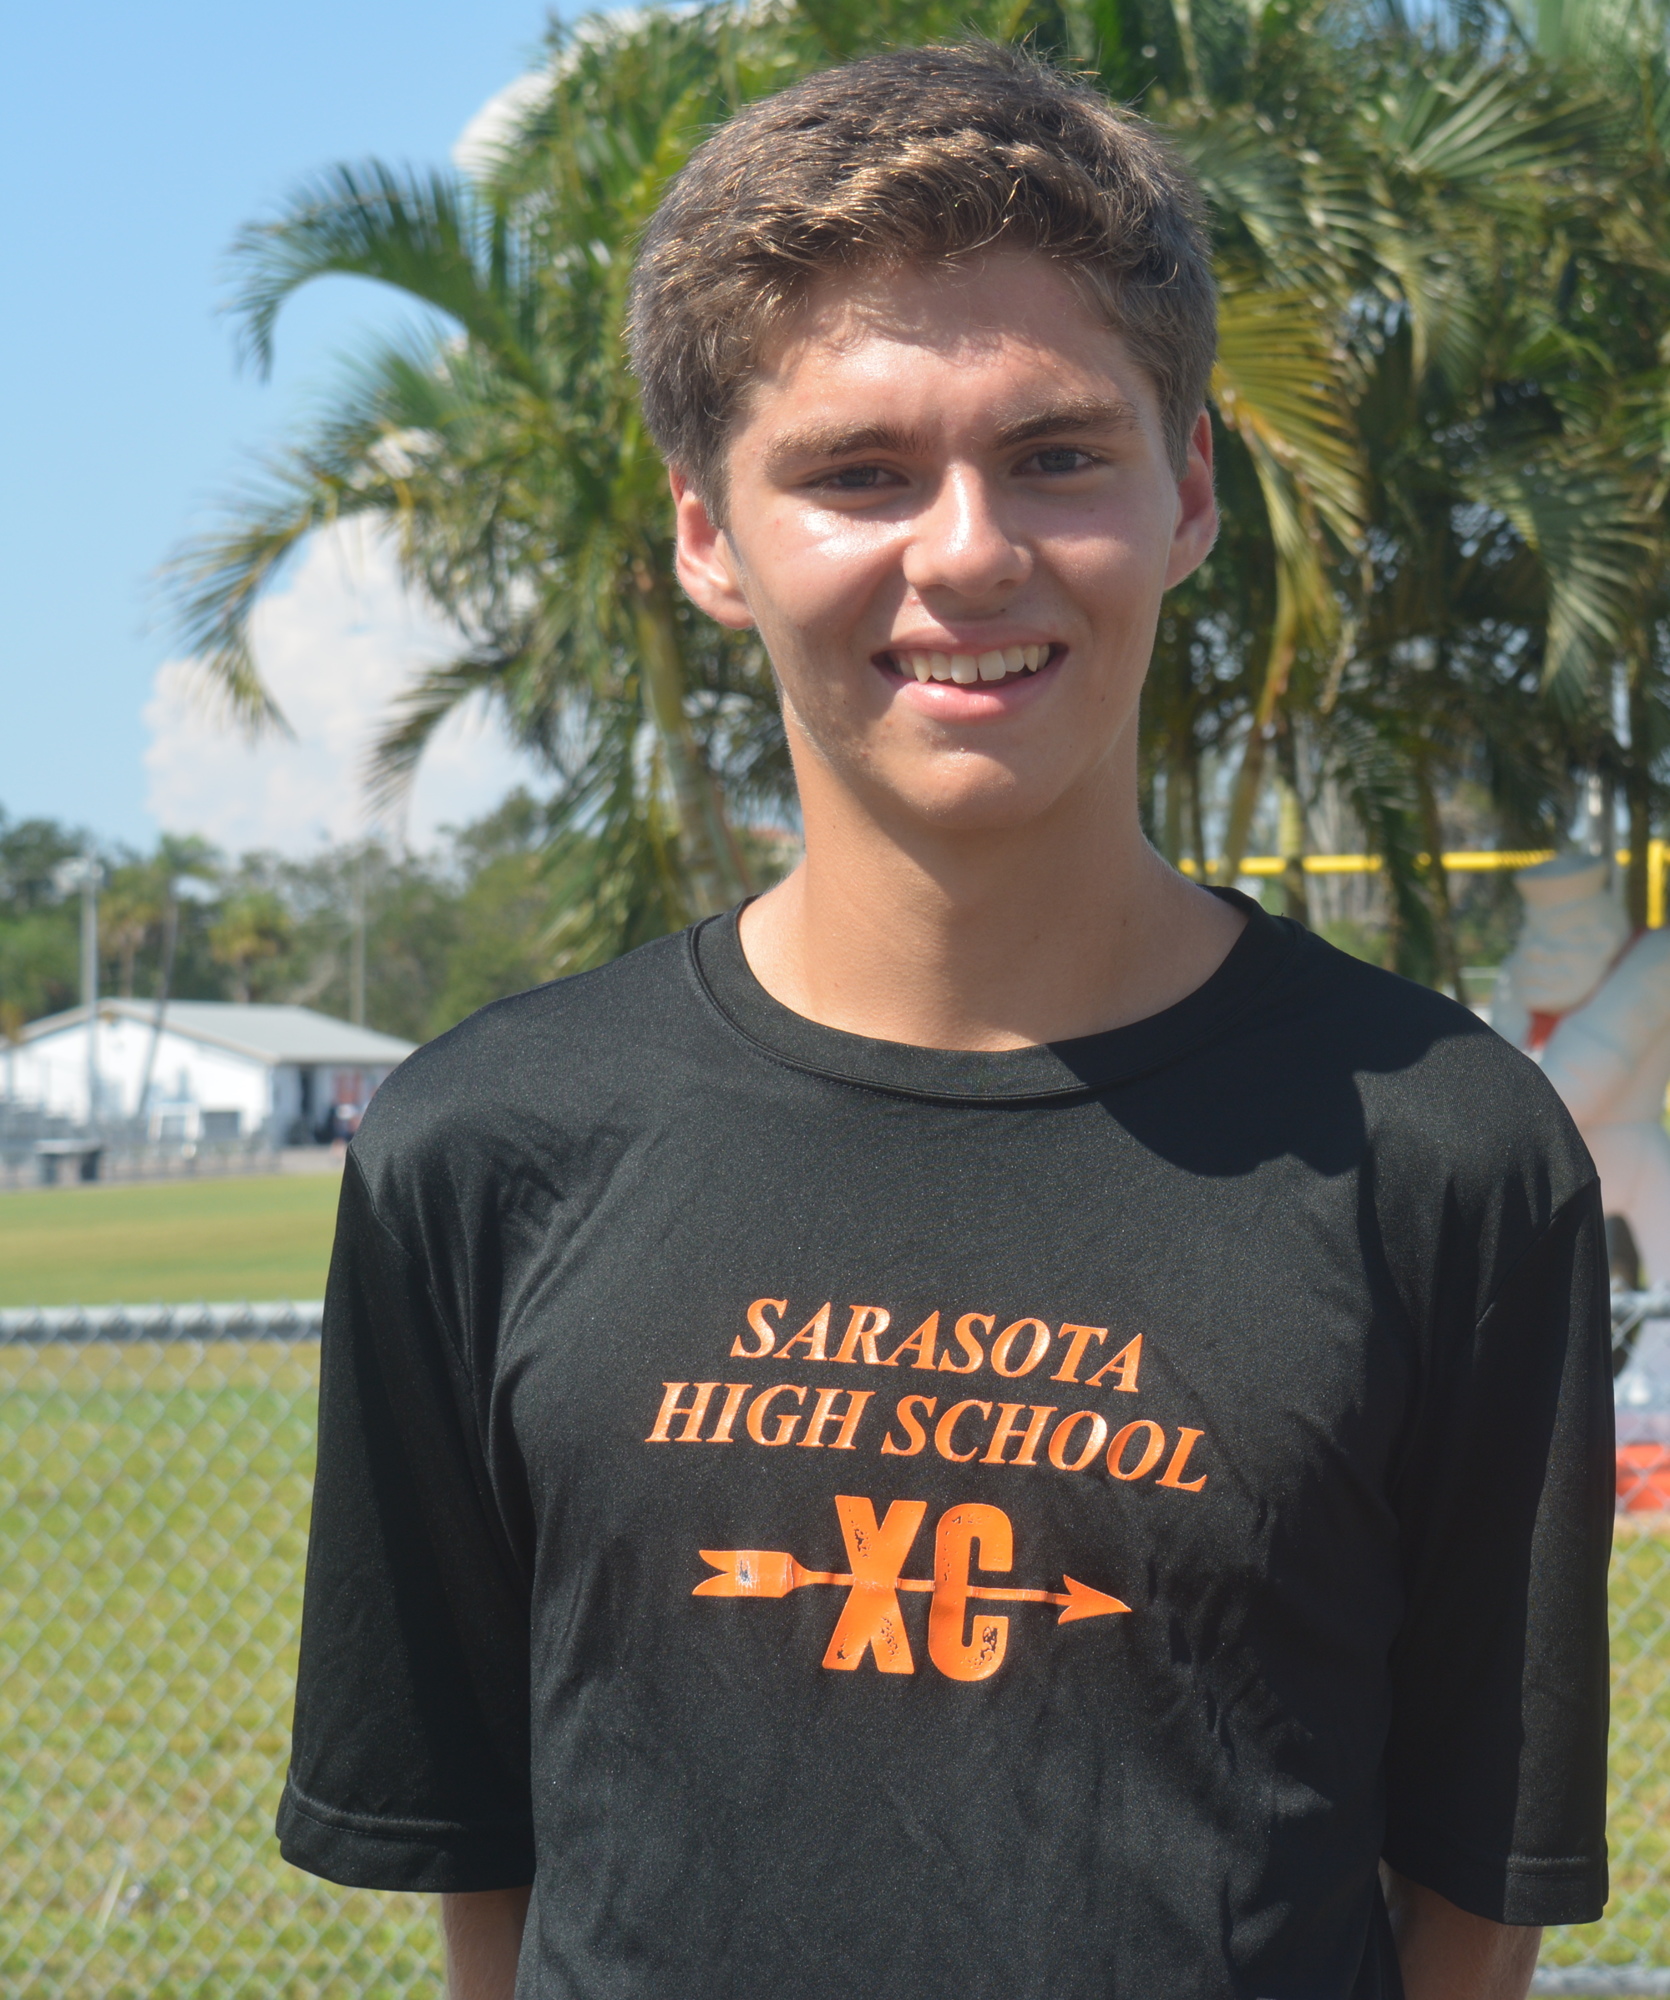 Sarasota High's Ben Hartvigsen, a junior, raced past the competition to win the Class 4A cross country title in 15:39.70.